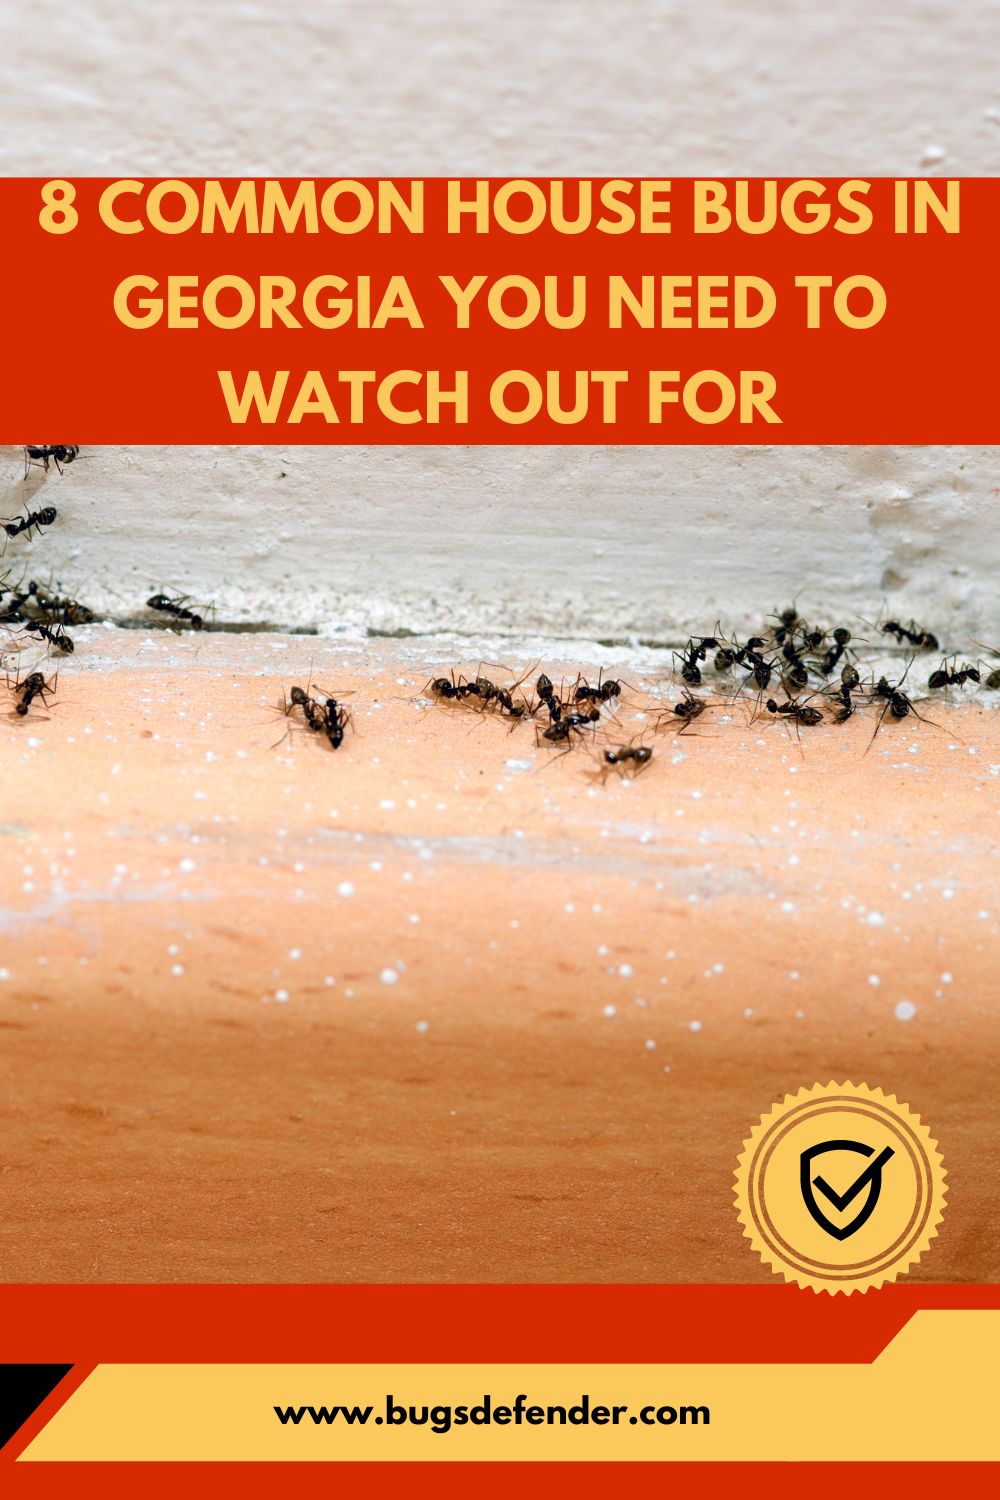 8 Common House Bugs In Georgia You Need To Watch Out For pin 1